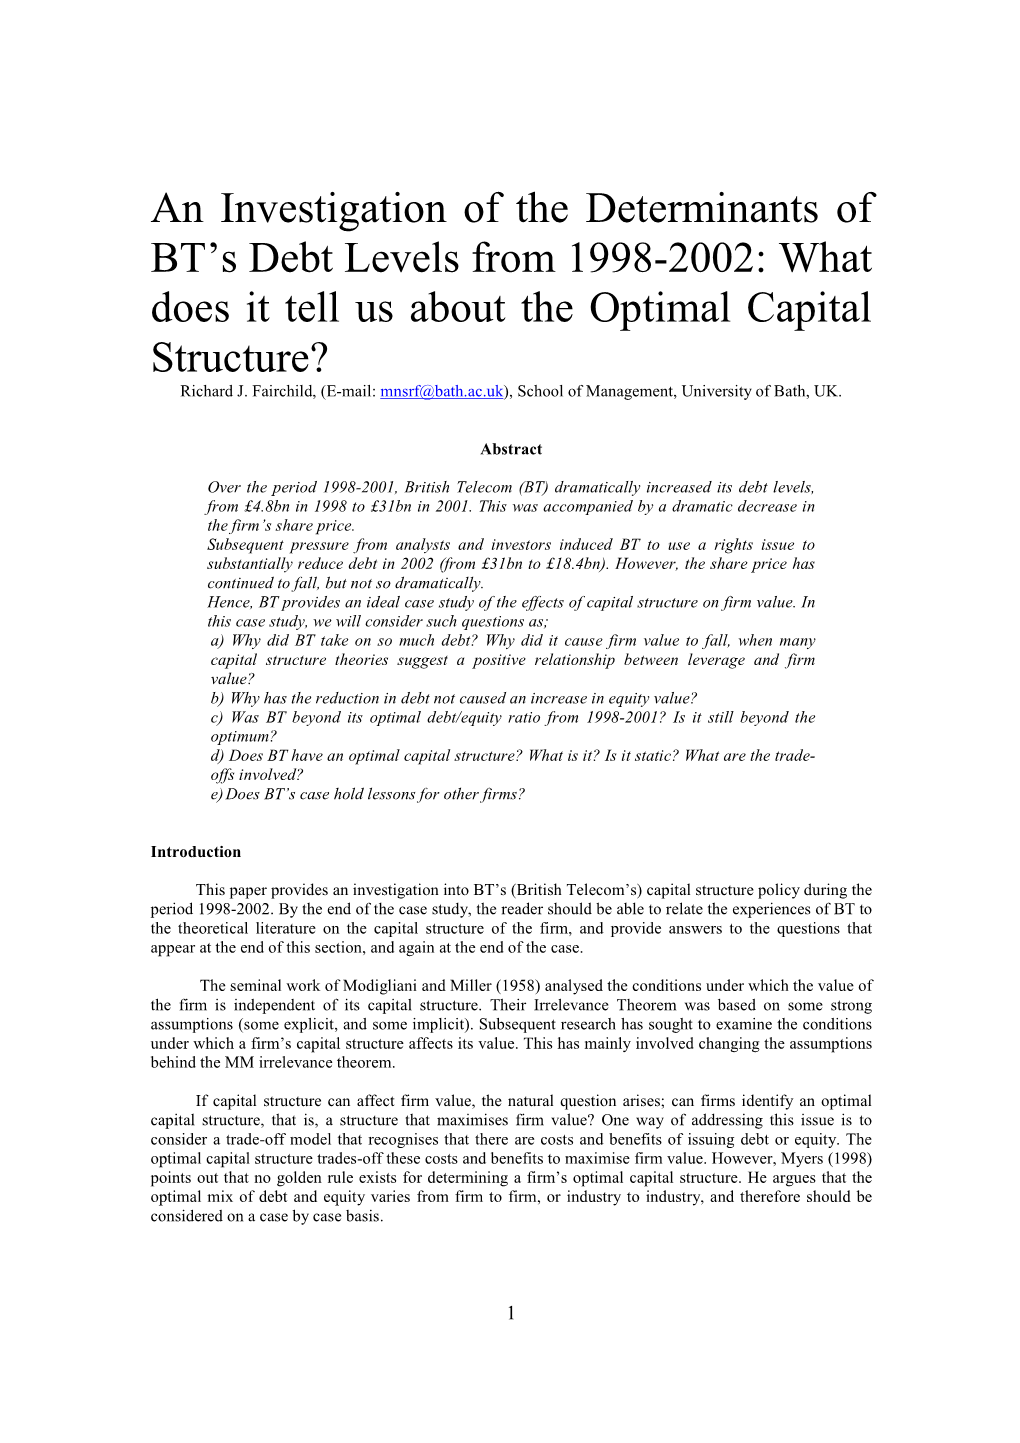 An Investigation of the Determinants of BT's Debt Levels from 1998-2002